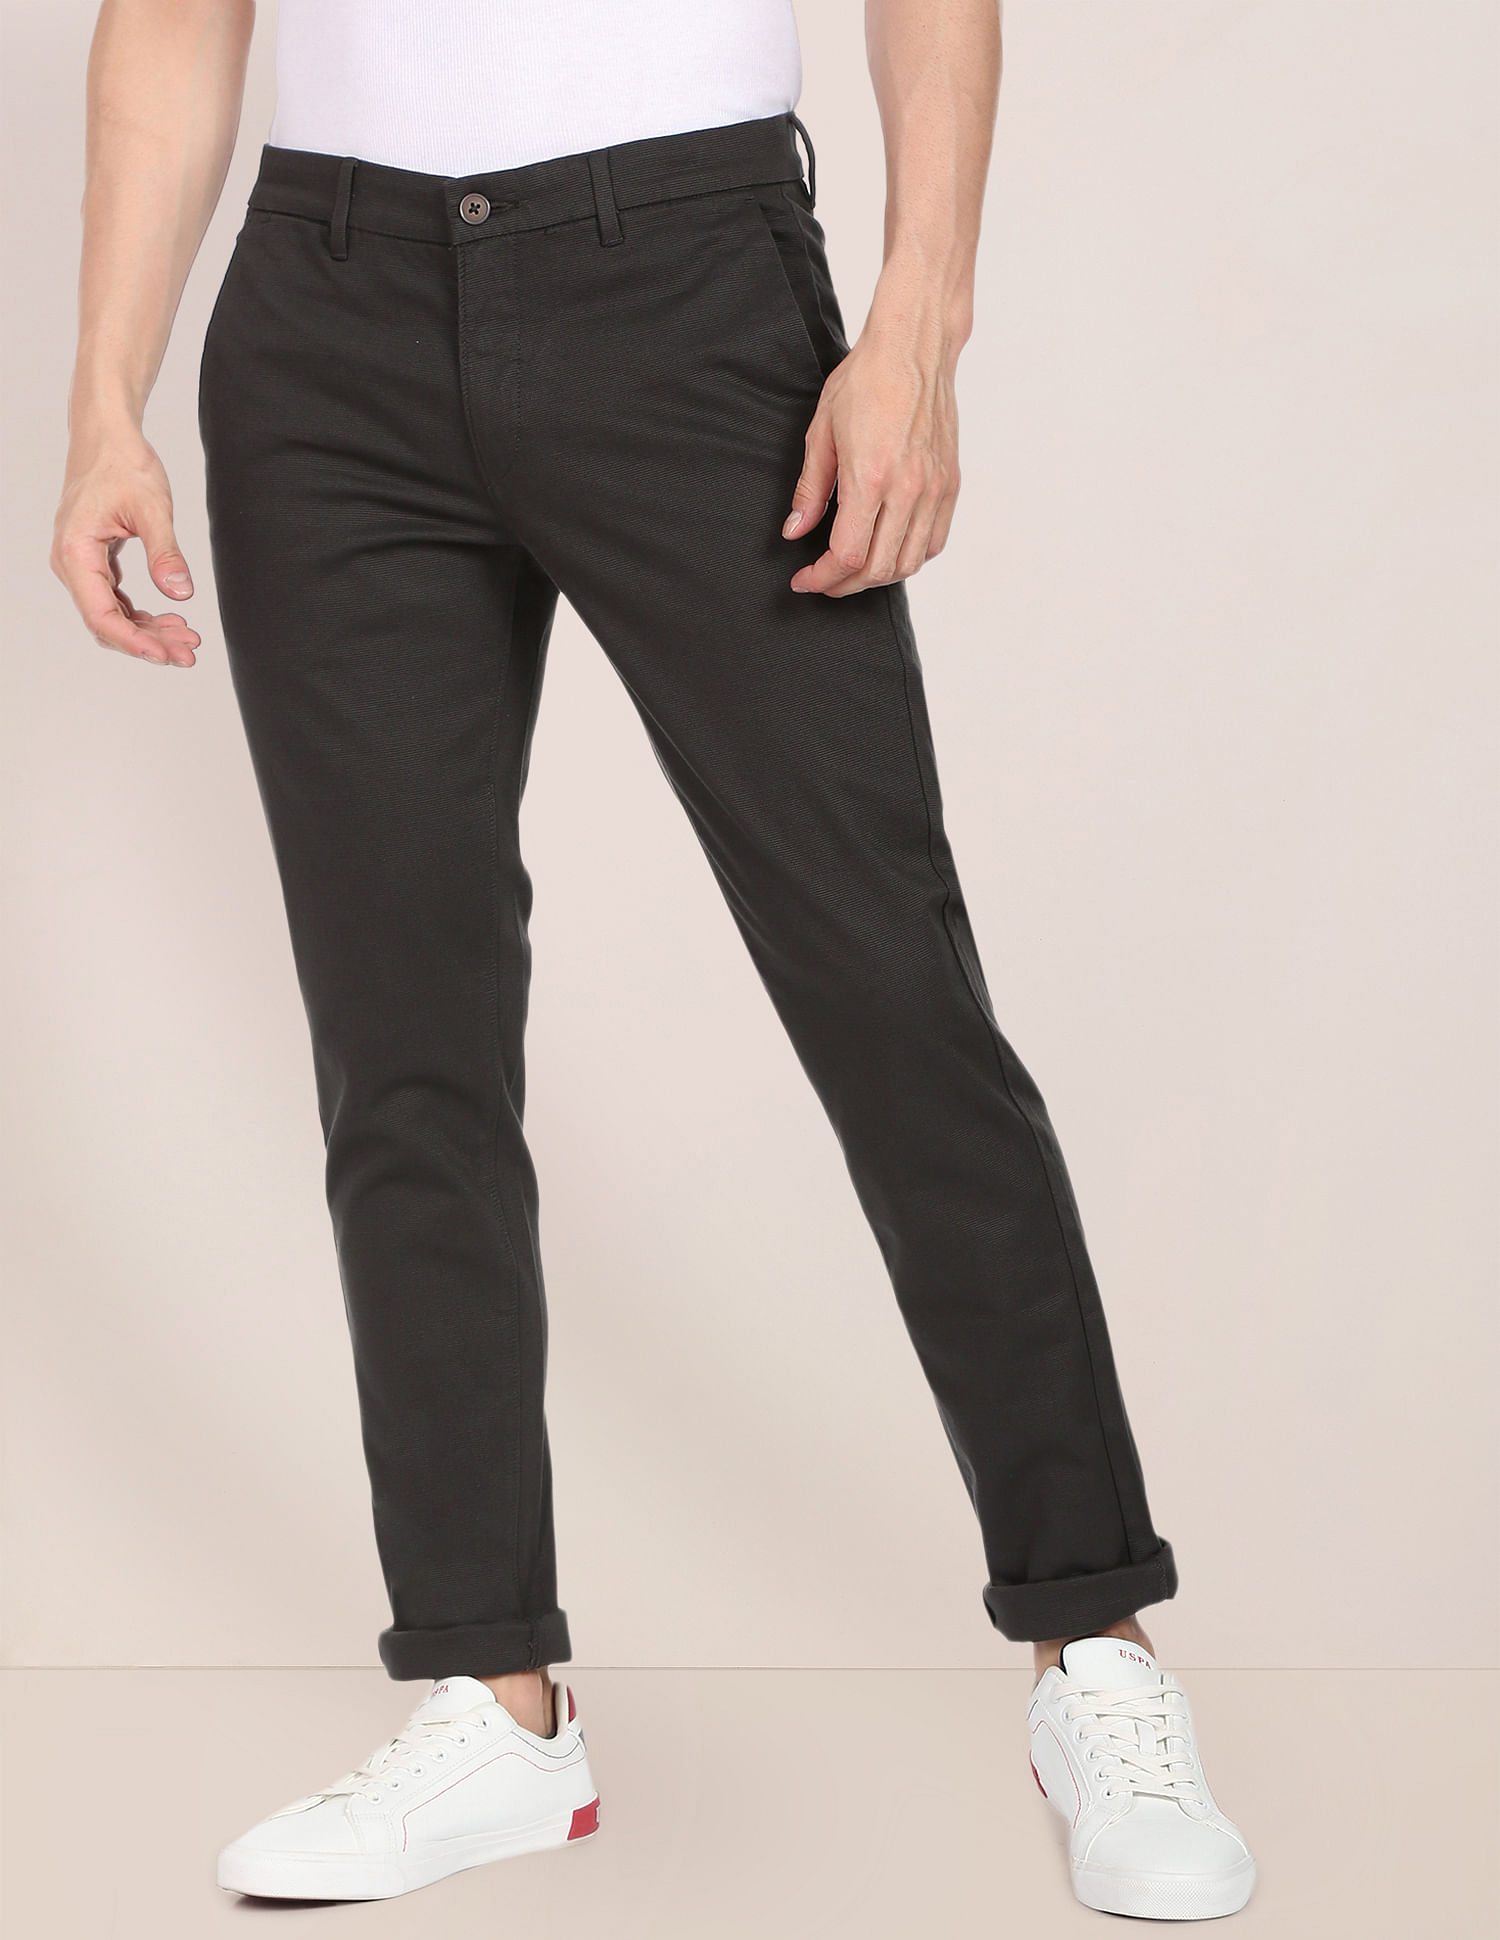 Buy The Slate grey Formal and casual Pant online for men  Beyours